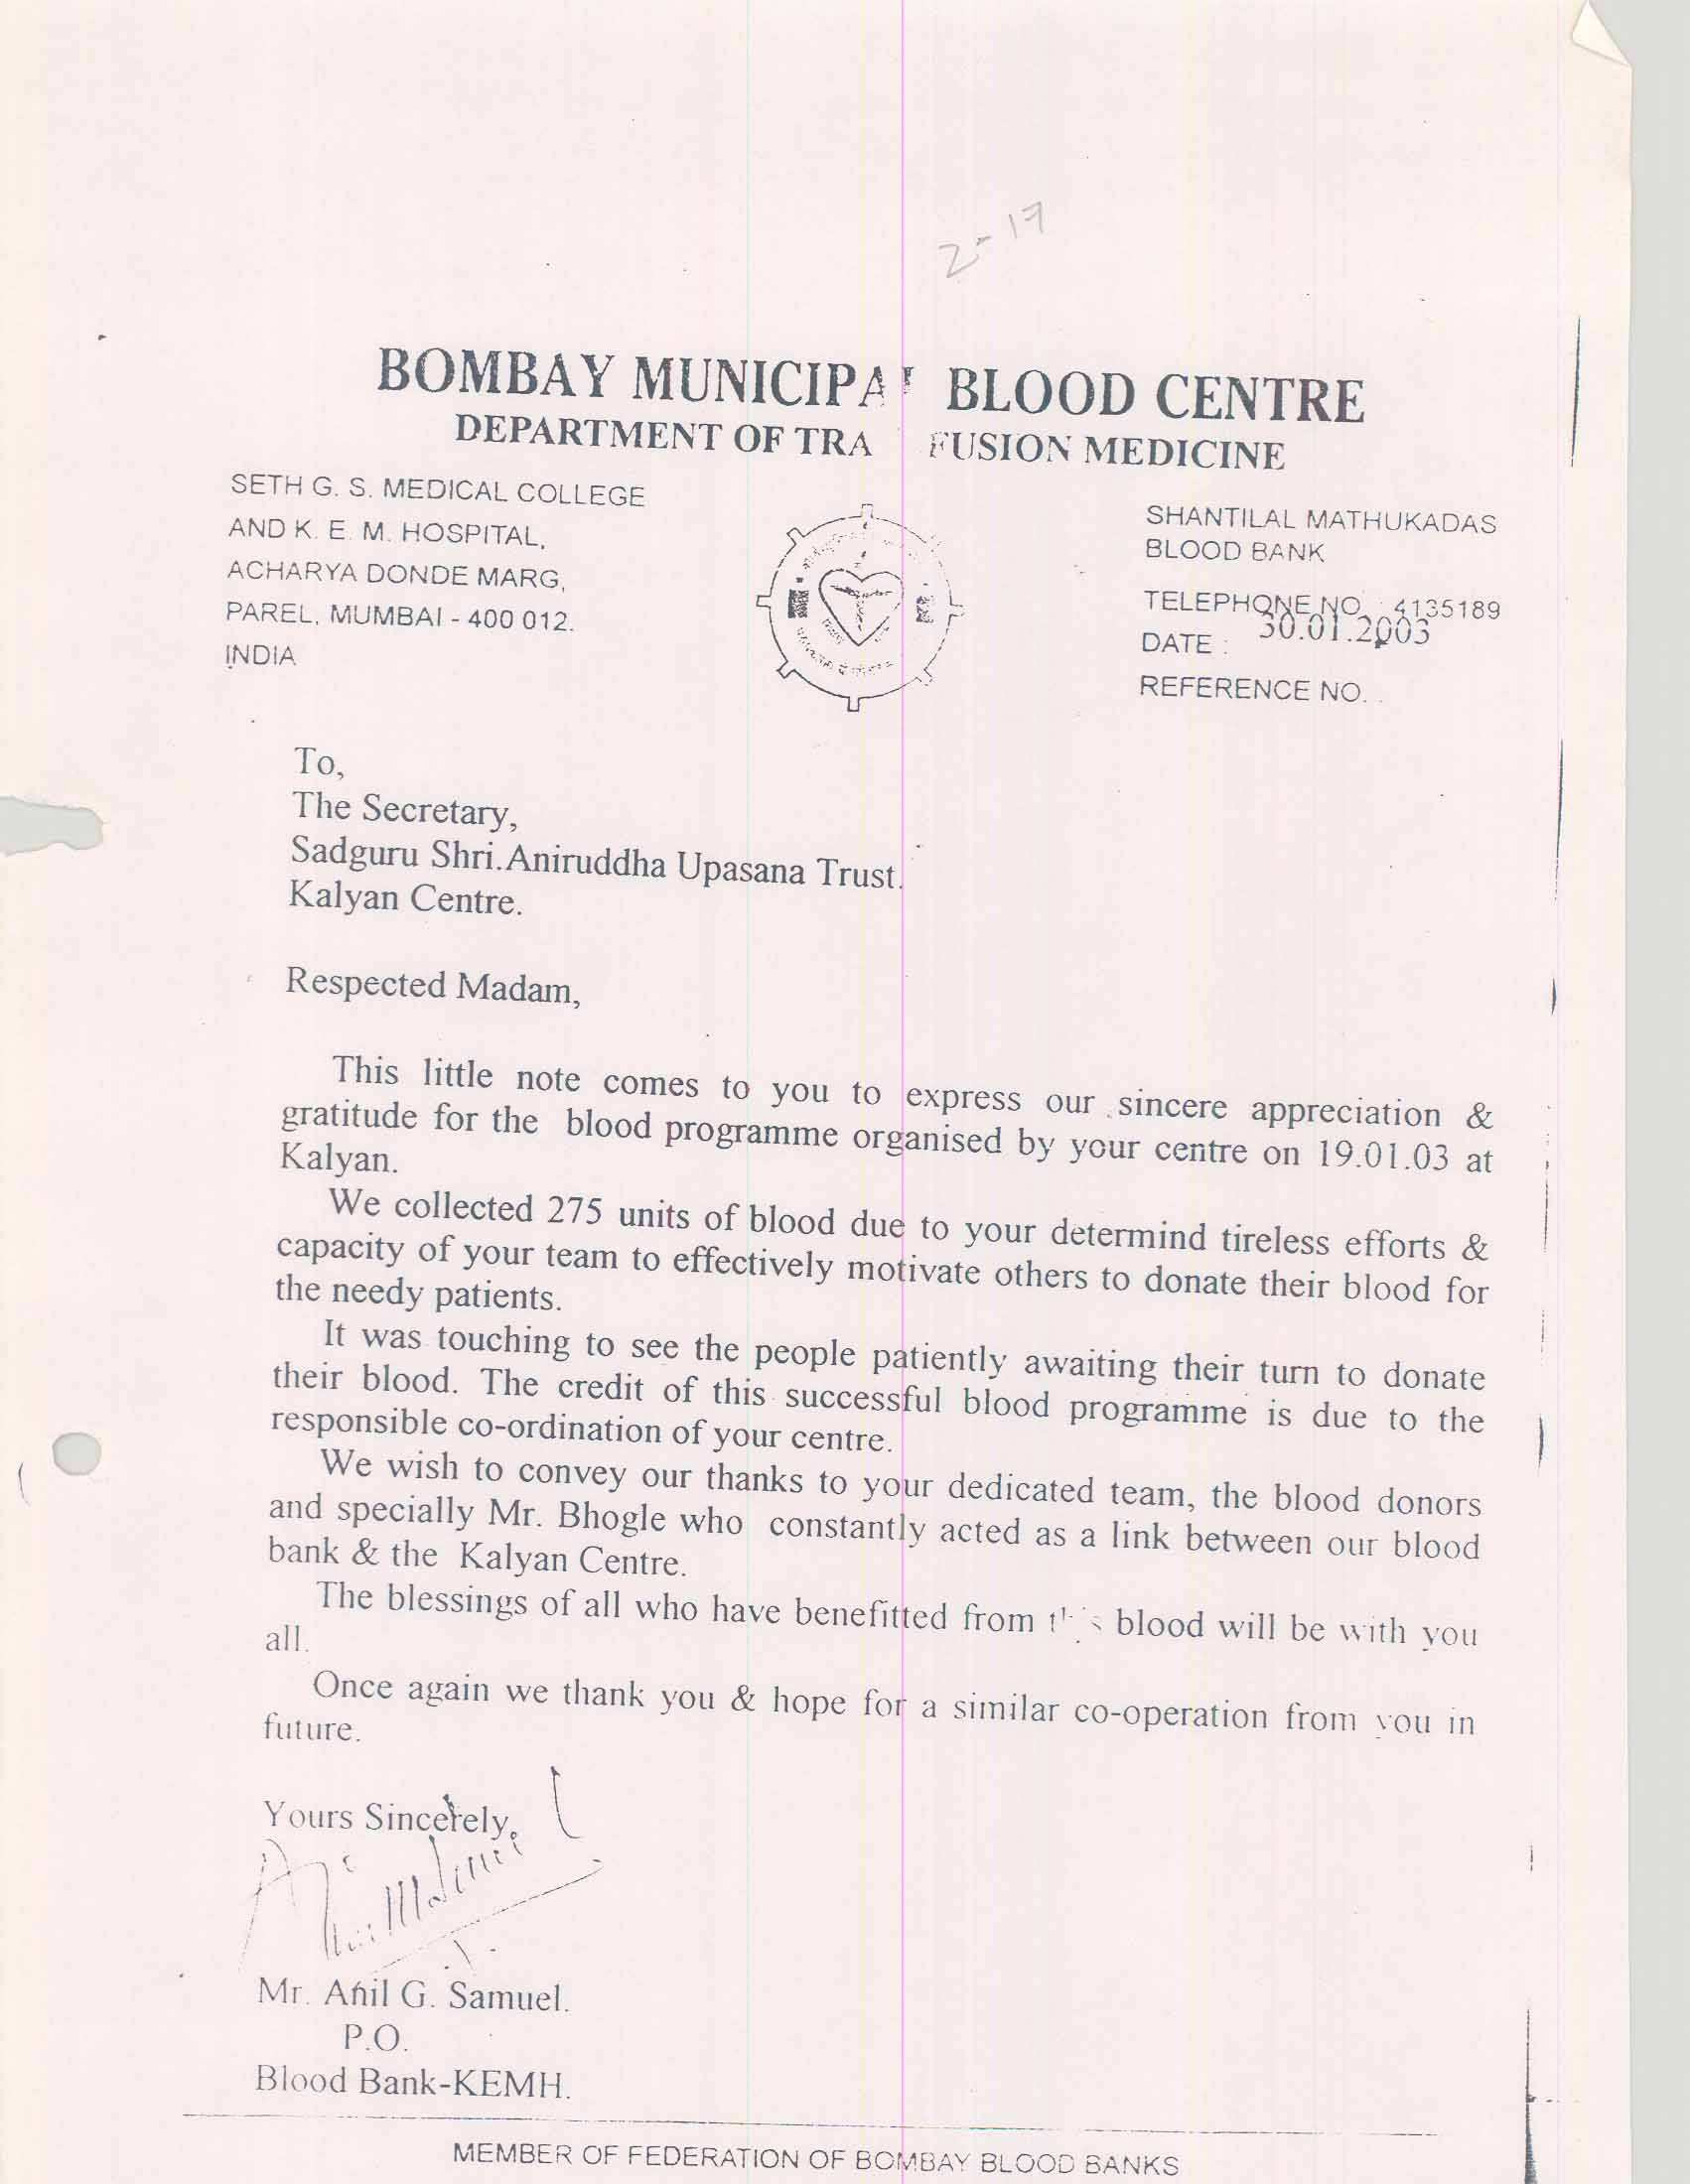 Appreciation-Letter from Bombay Municipal Blood Center 2003-for-Aniruddhafoundation-Compassion-Social-services